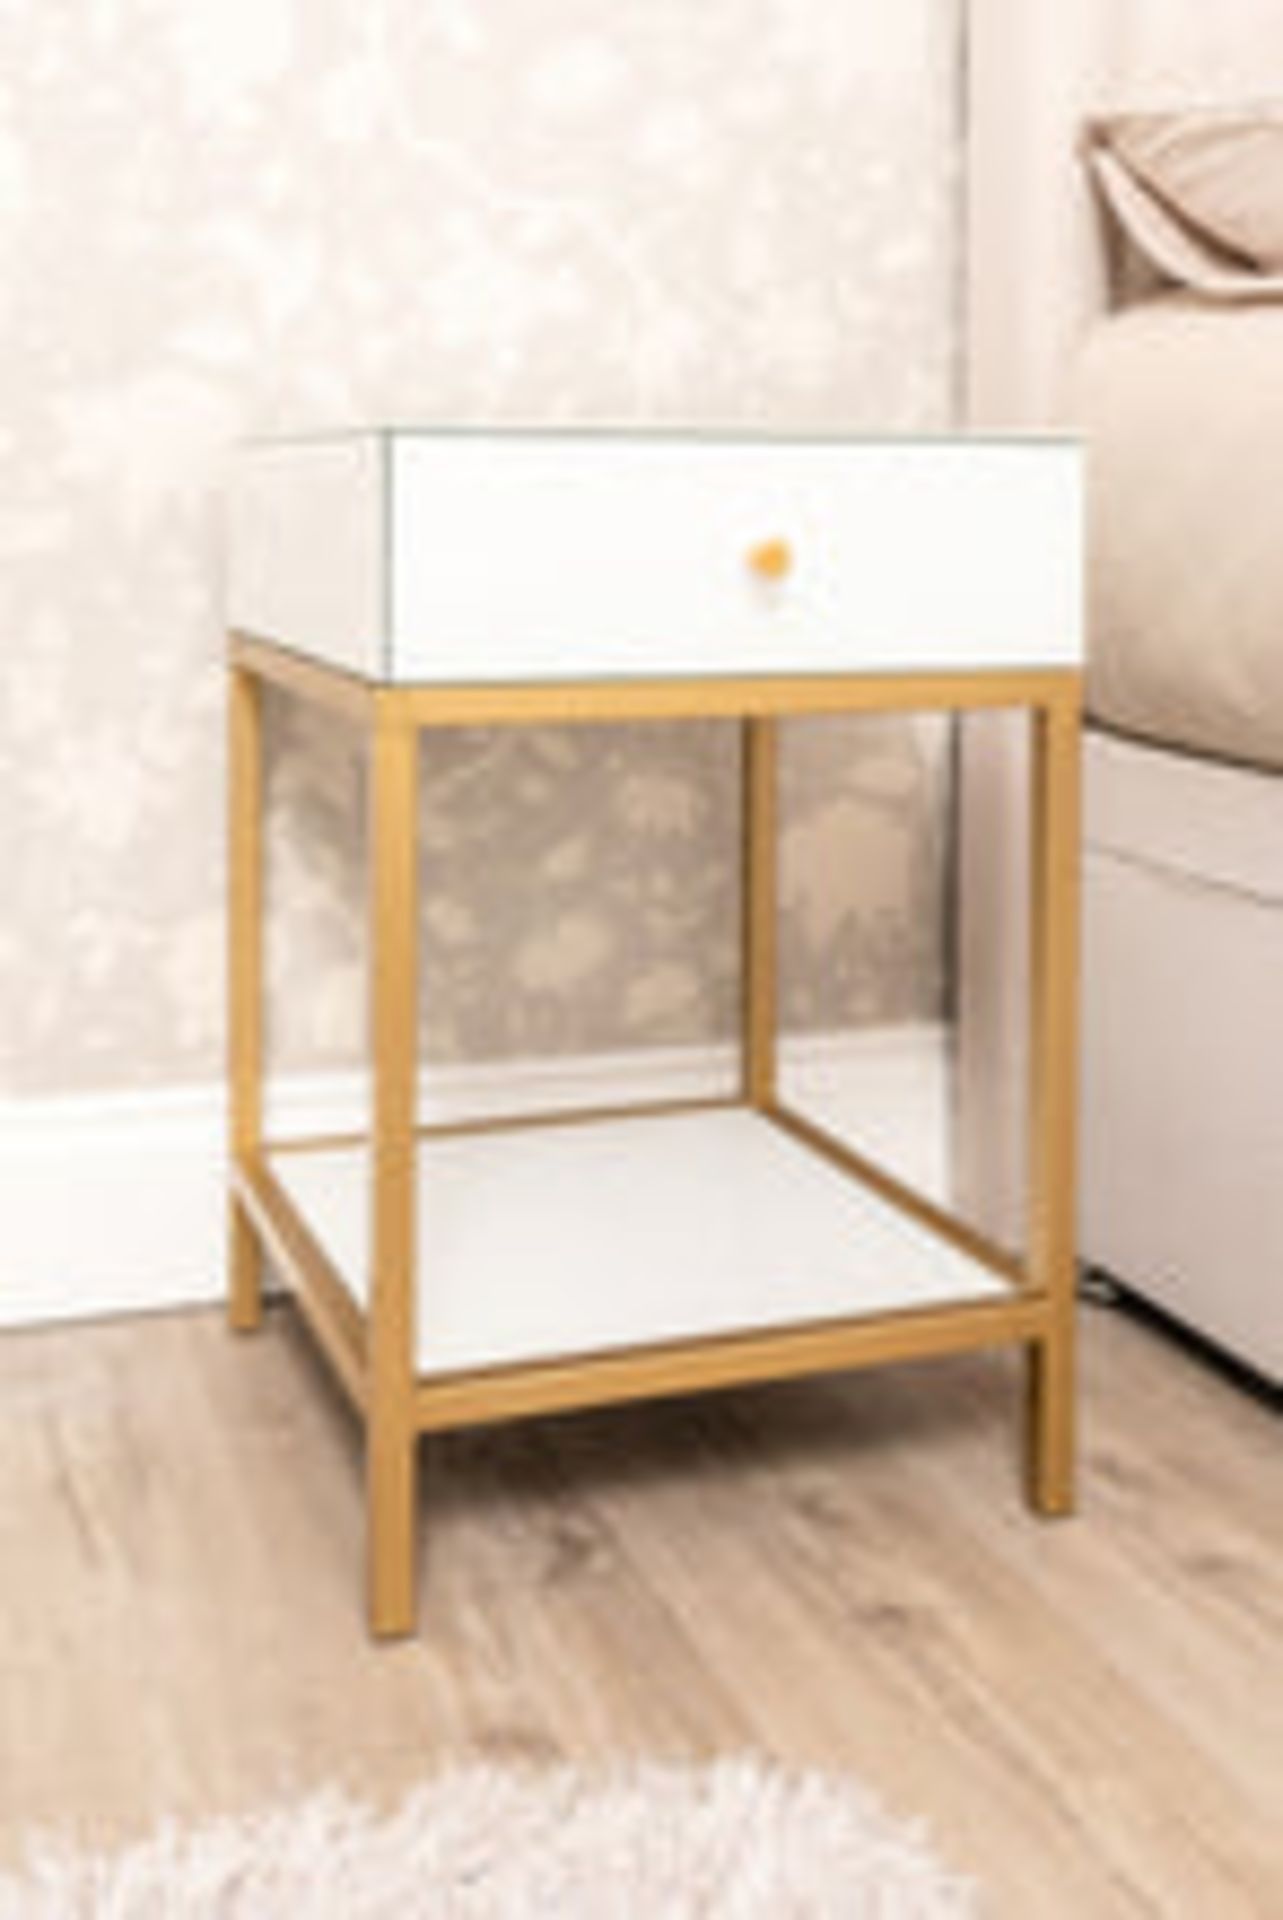 BRAND NEW BOXED DUBAI WHITE AND GOLD BEDSIDE TABLE - 40X40X60KG (BOX 51X51X71CM, 17KG)